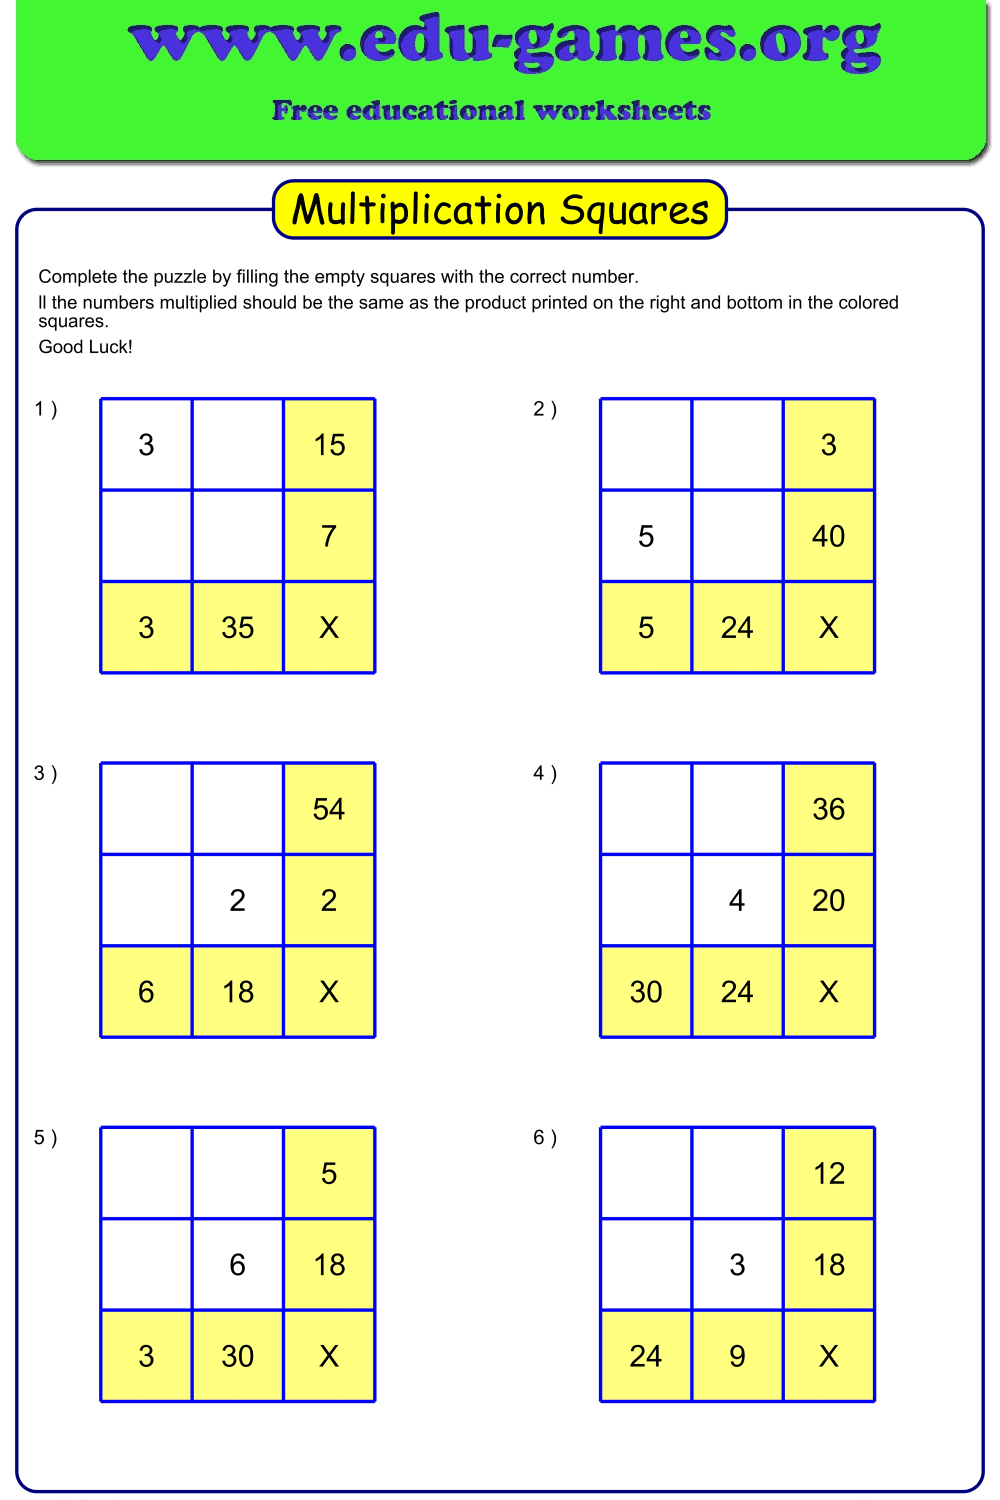 multiplications-squares-png